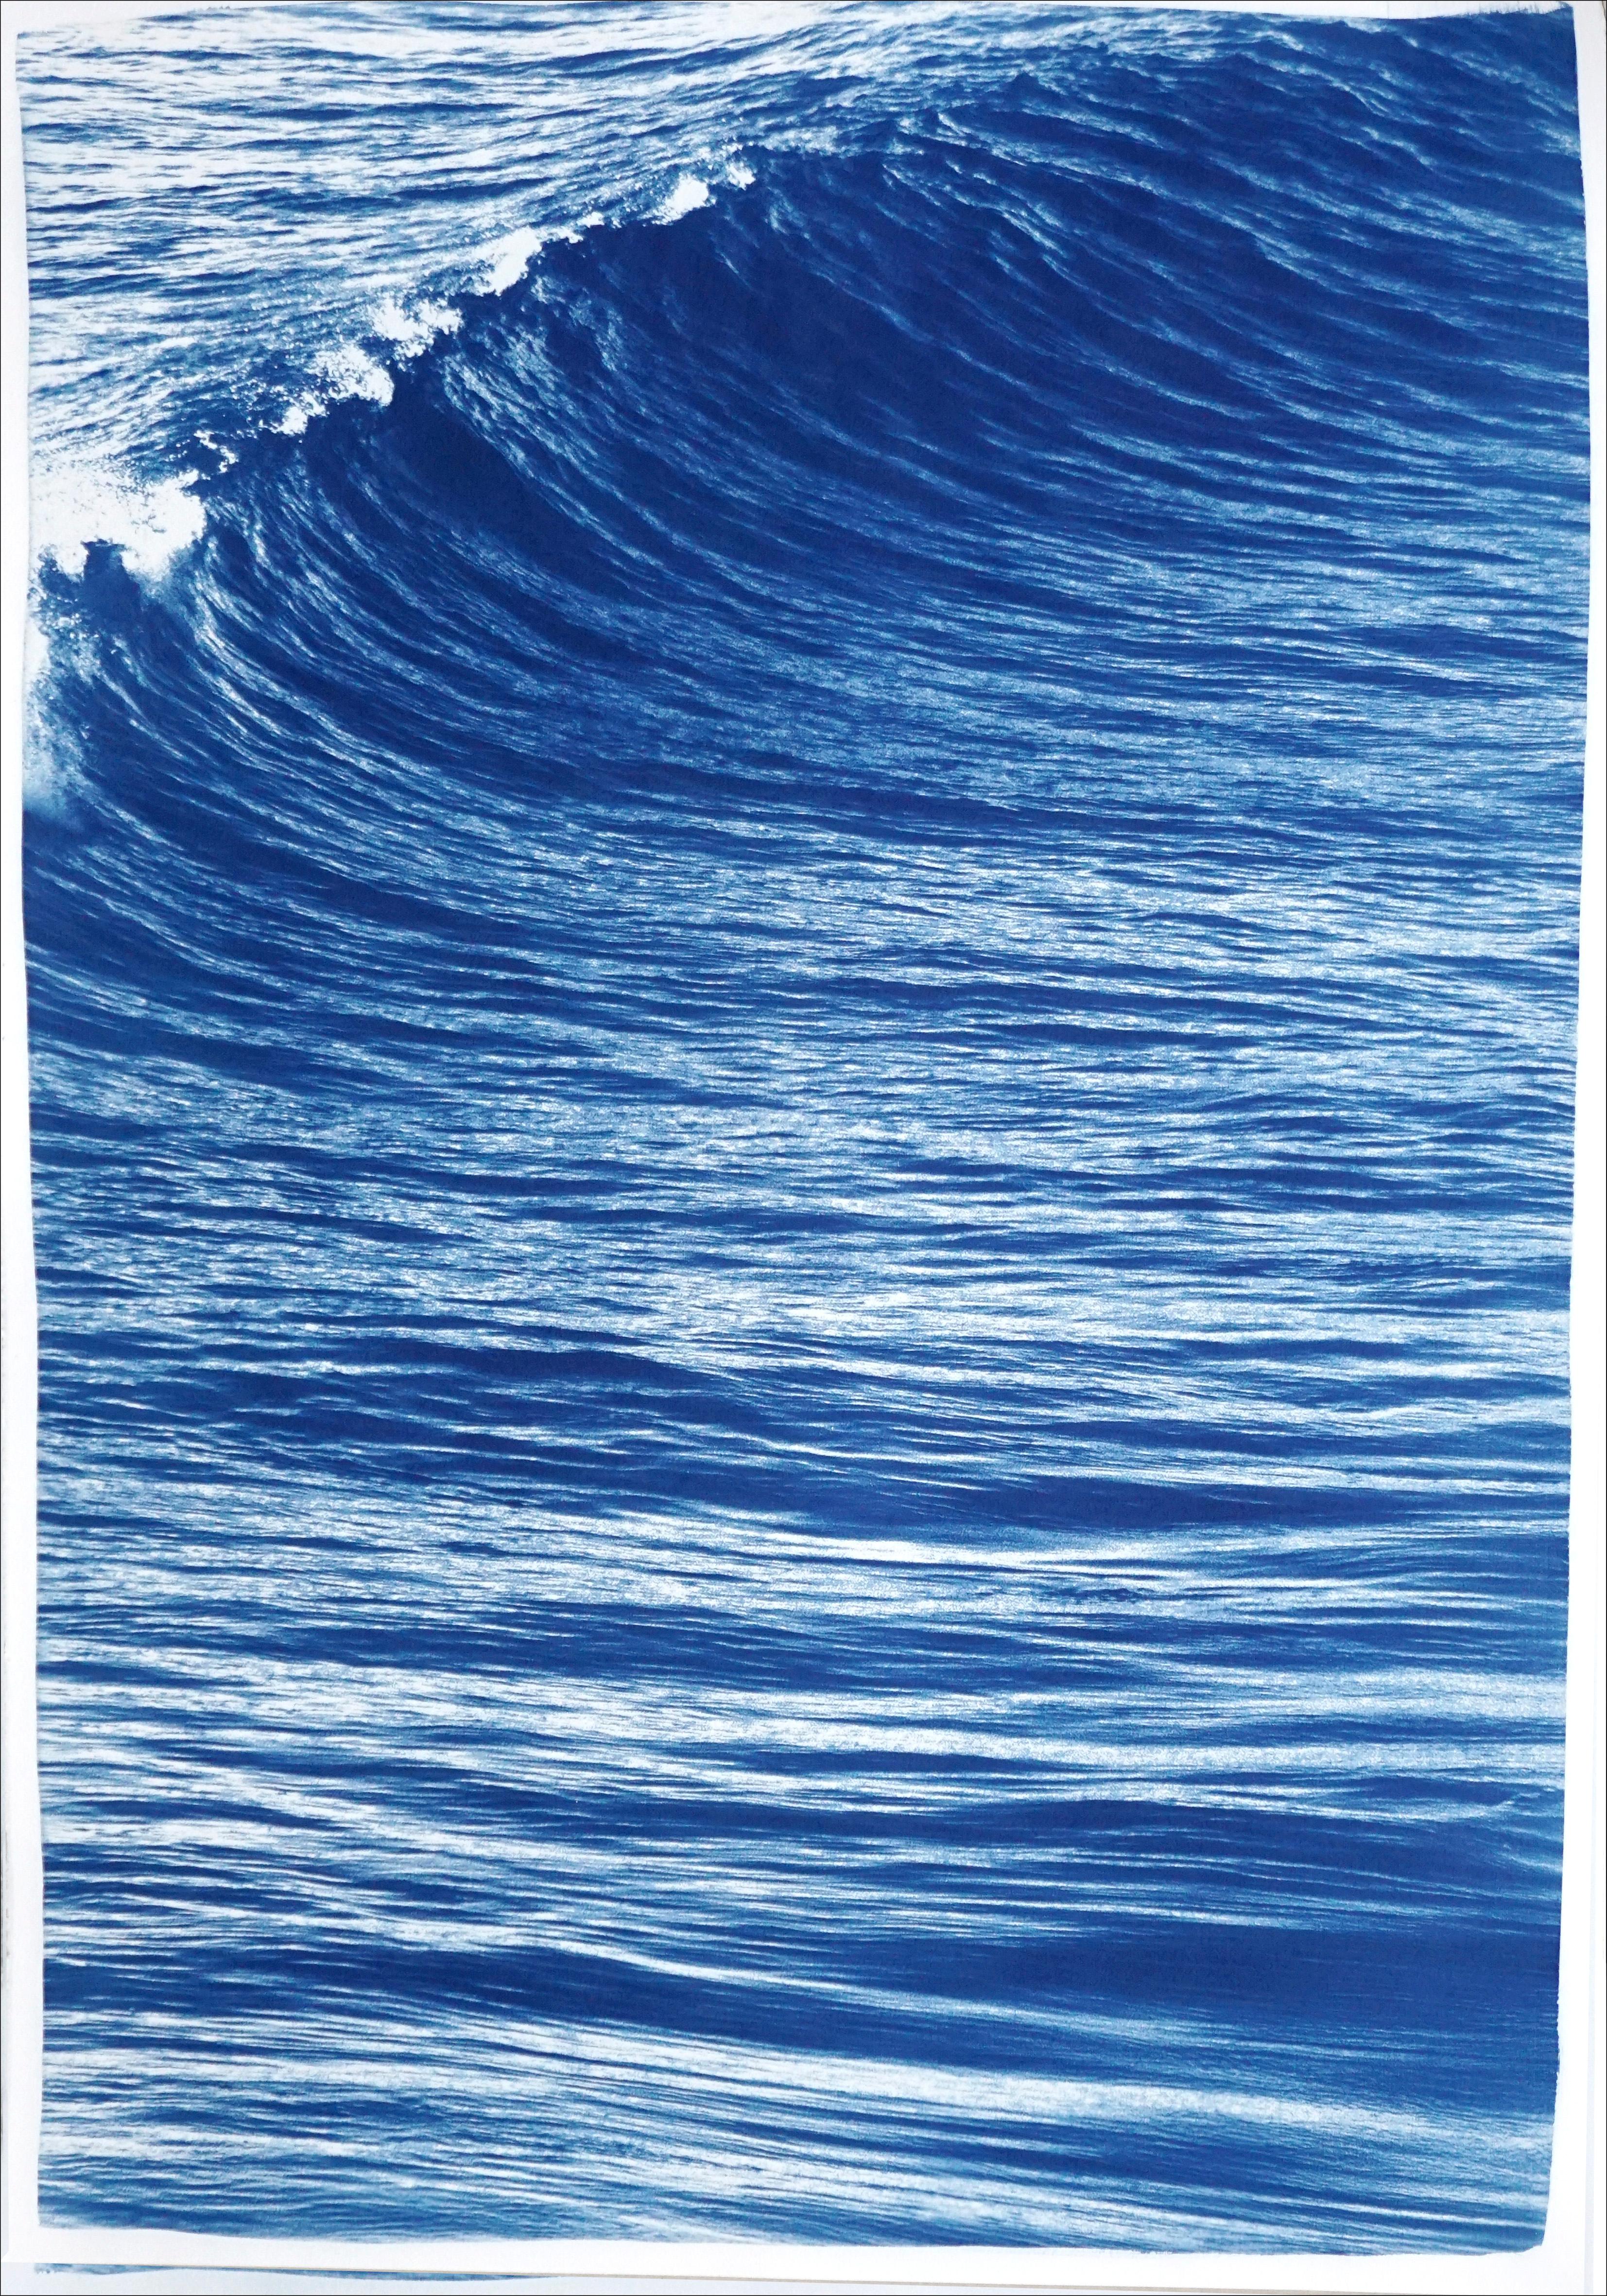 This series of cyanotype triptychs showcases the beauty of nature scenes, including stunning beaches and oceans, as well as the intricate textures of water, forests, and skies. These triptychs are large pieces that feature lush blues, making them an